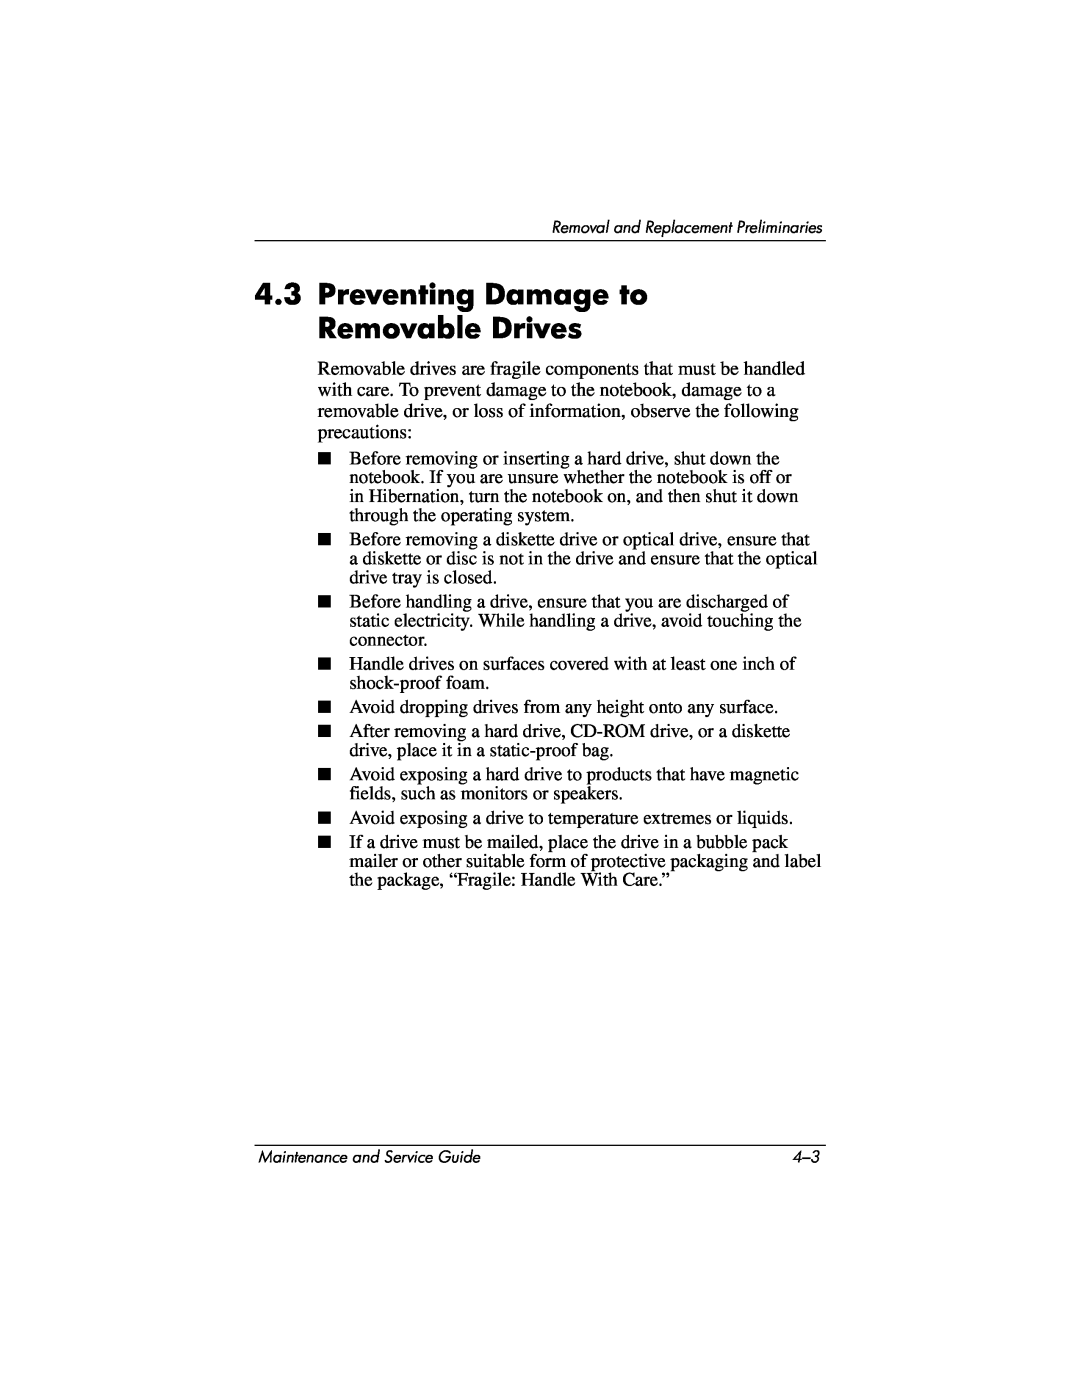 HP ZE4900, NX9040, NX9030, NX9020 manual Preventing Damage to Removable Drives 